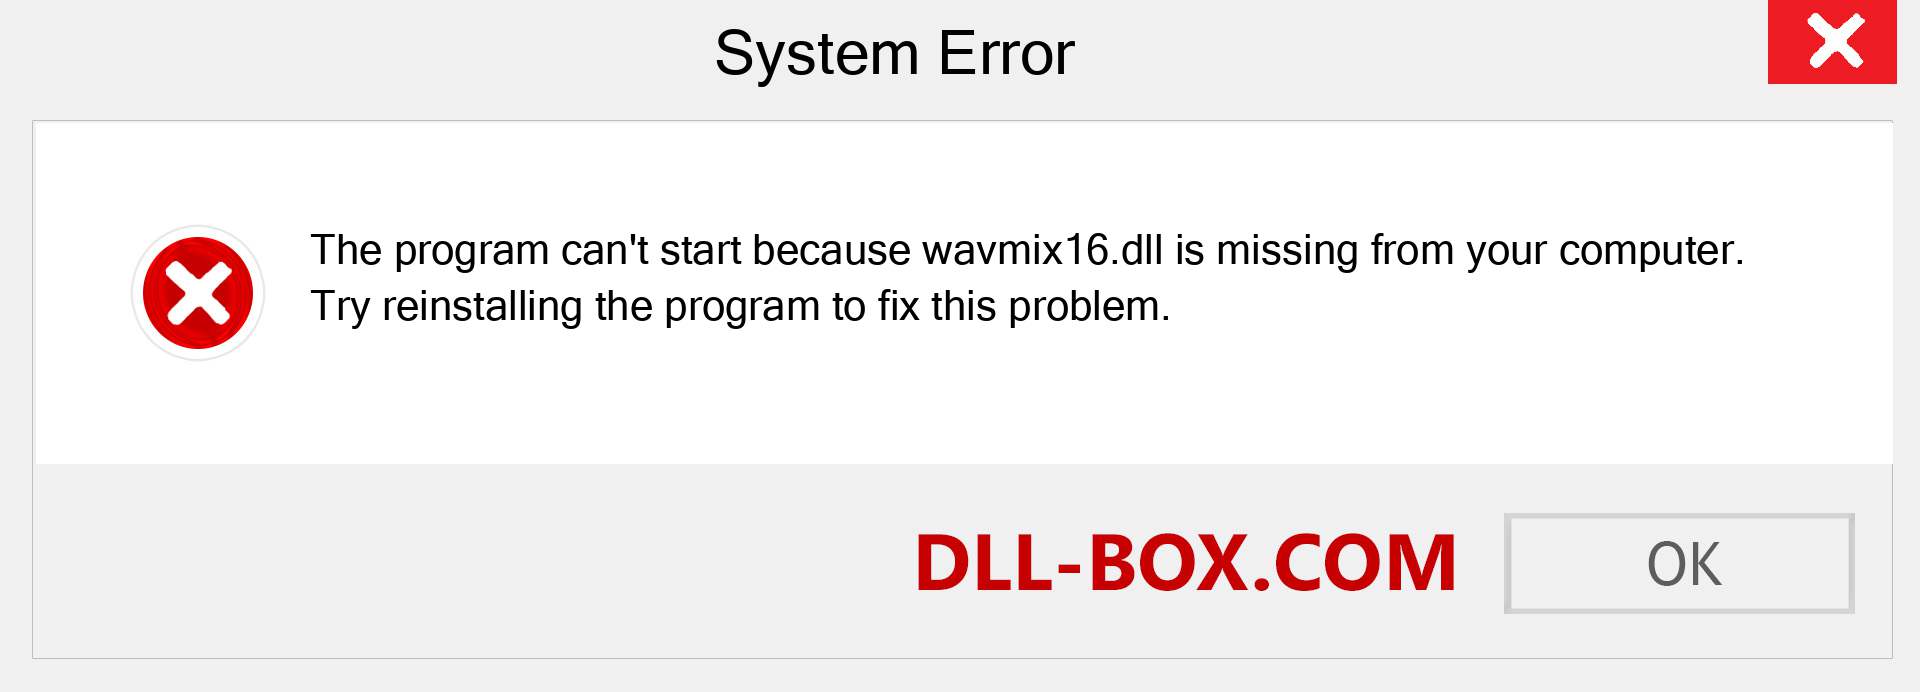  wavmix16.dll file is missing?. Download for Windows 7, 8, 10 - Fix  wavmix16 dll Missing Error on Windows, photos, images